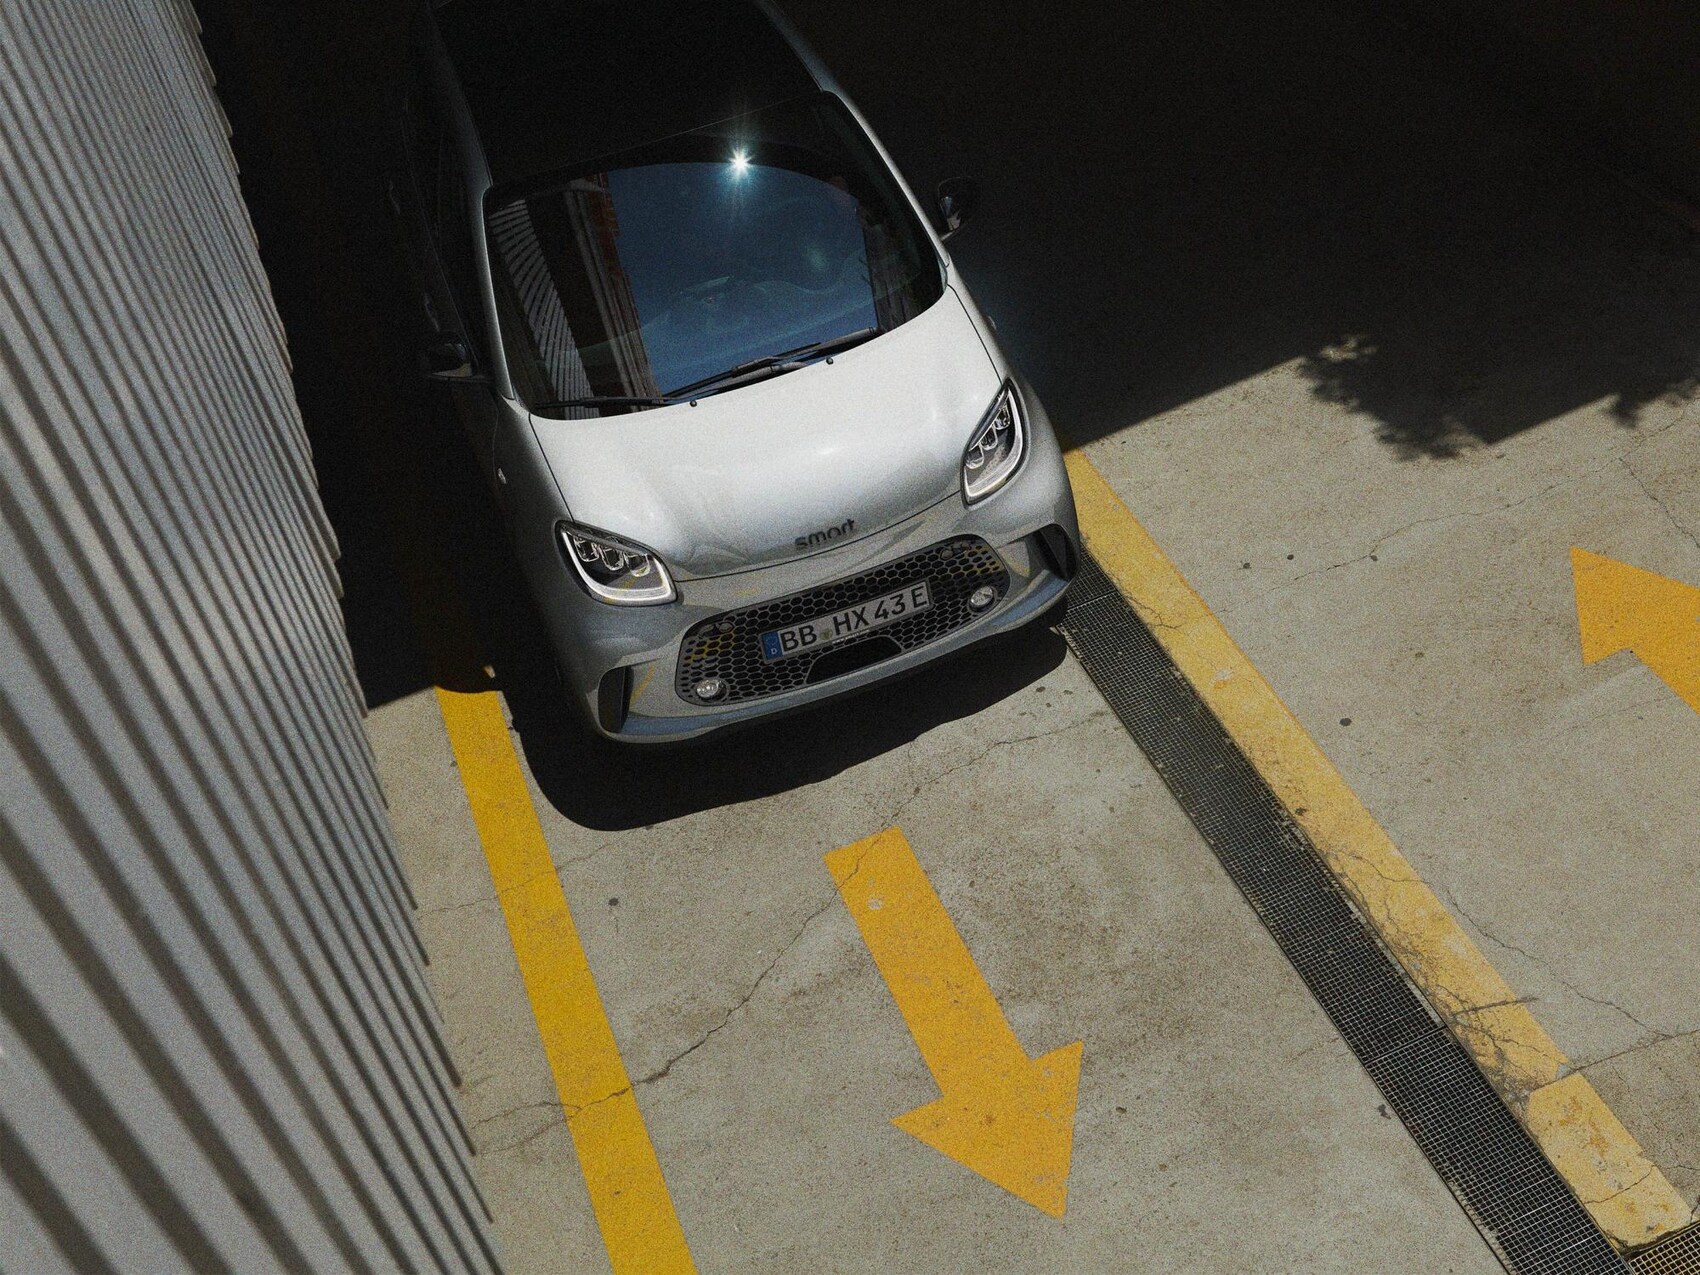 smart eq forfour Edition One on street